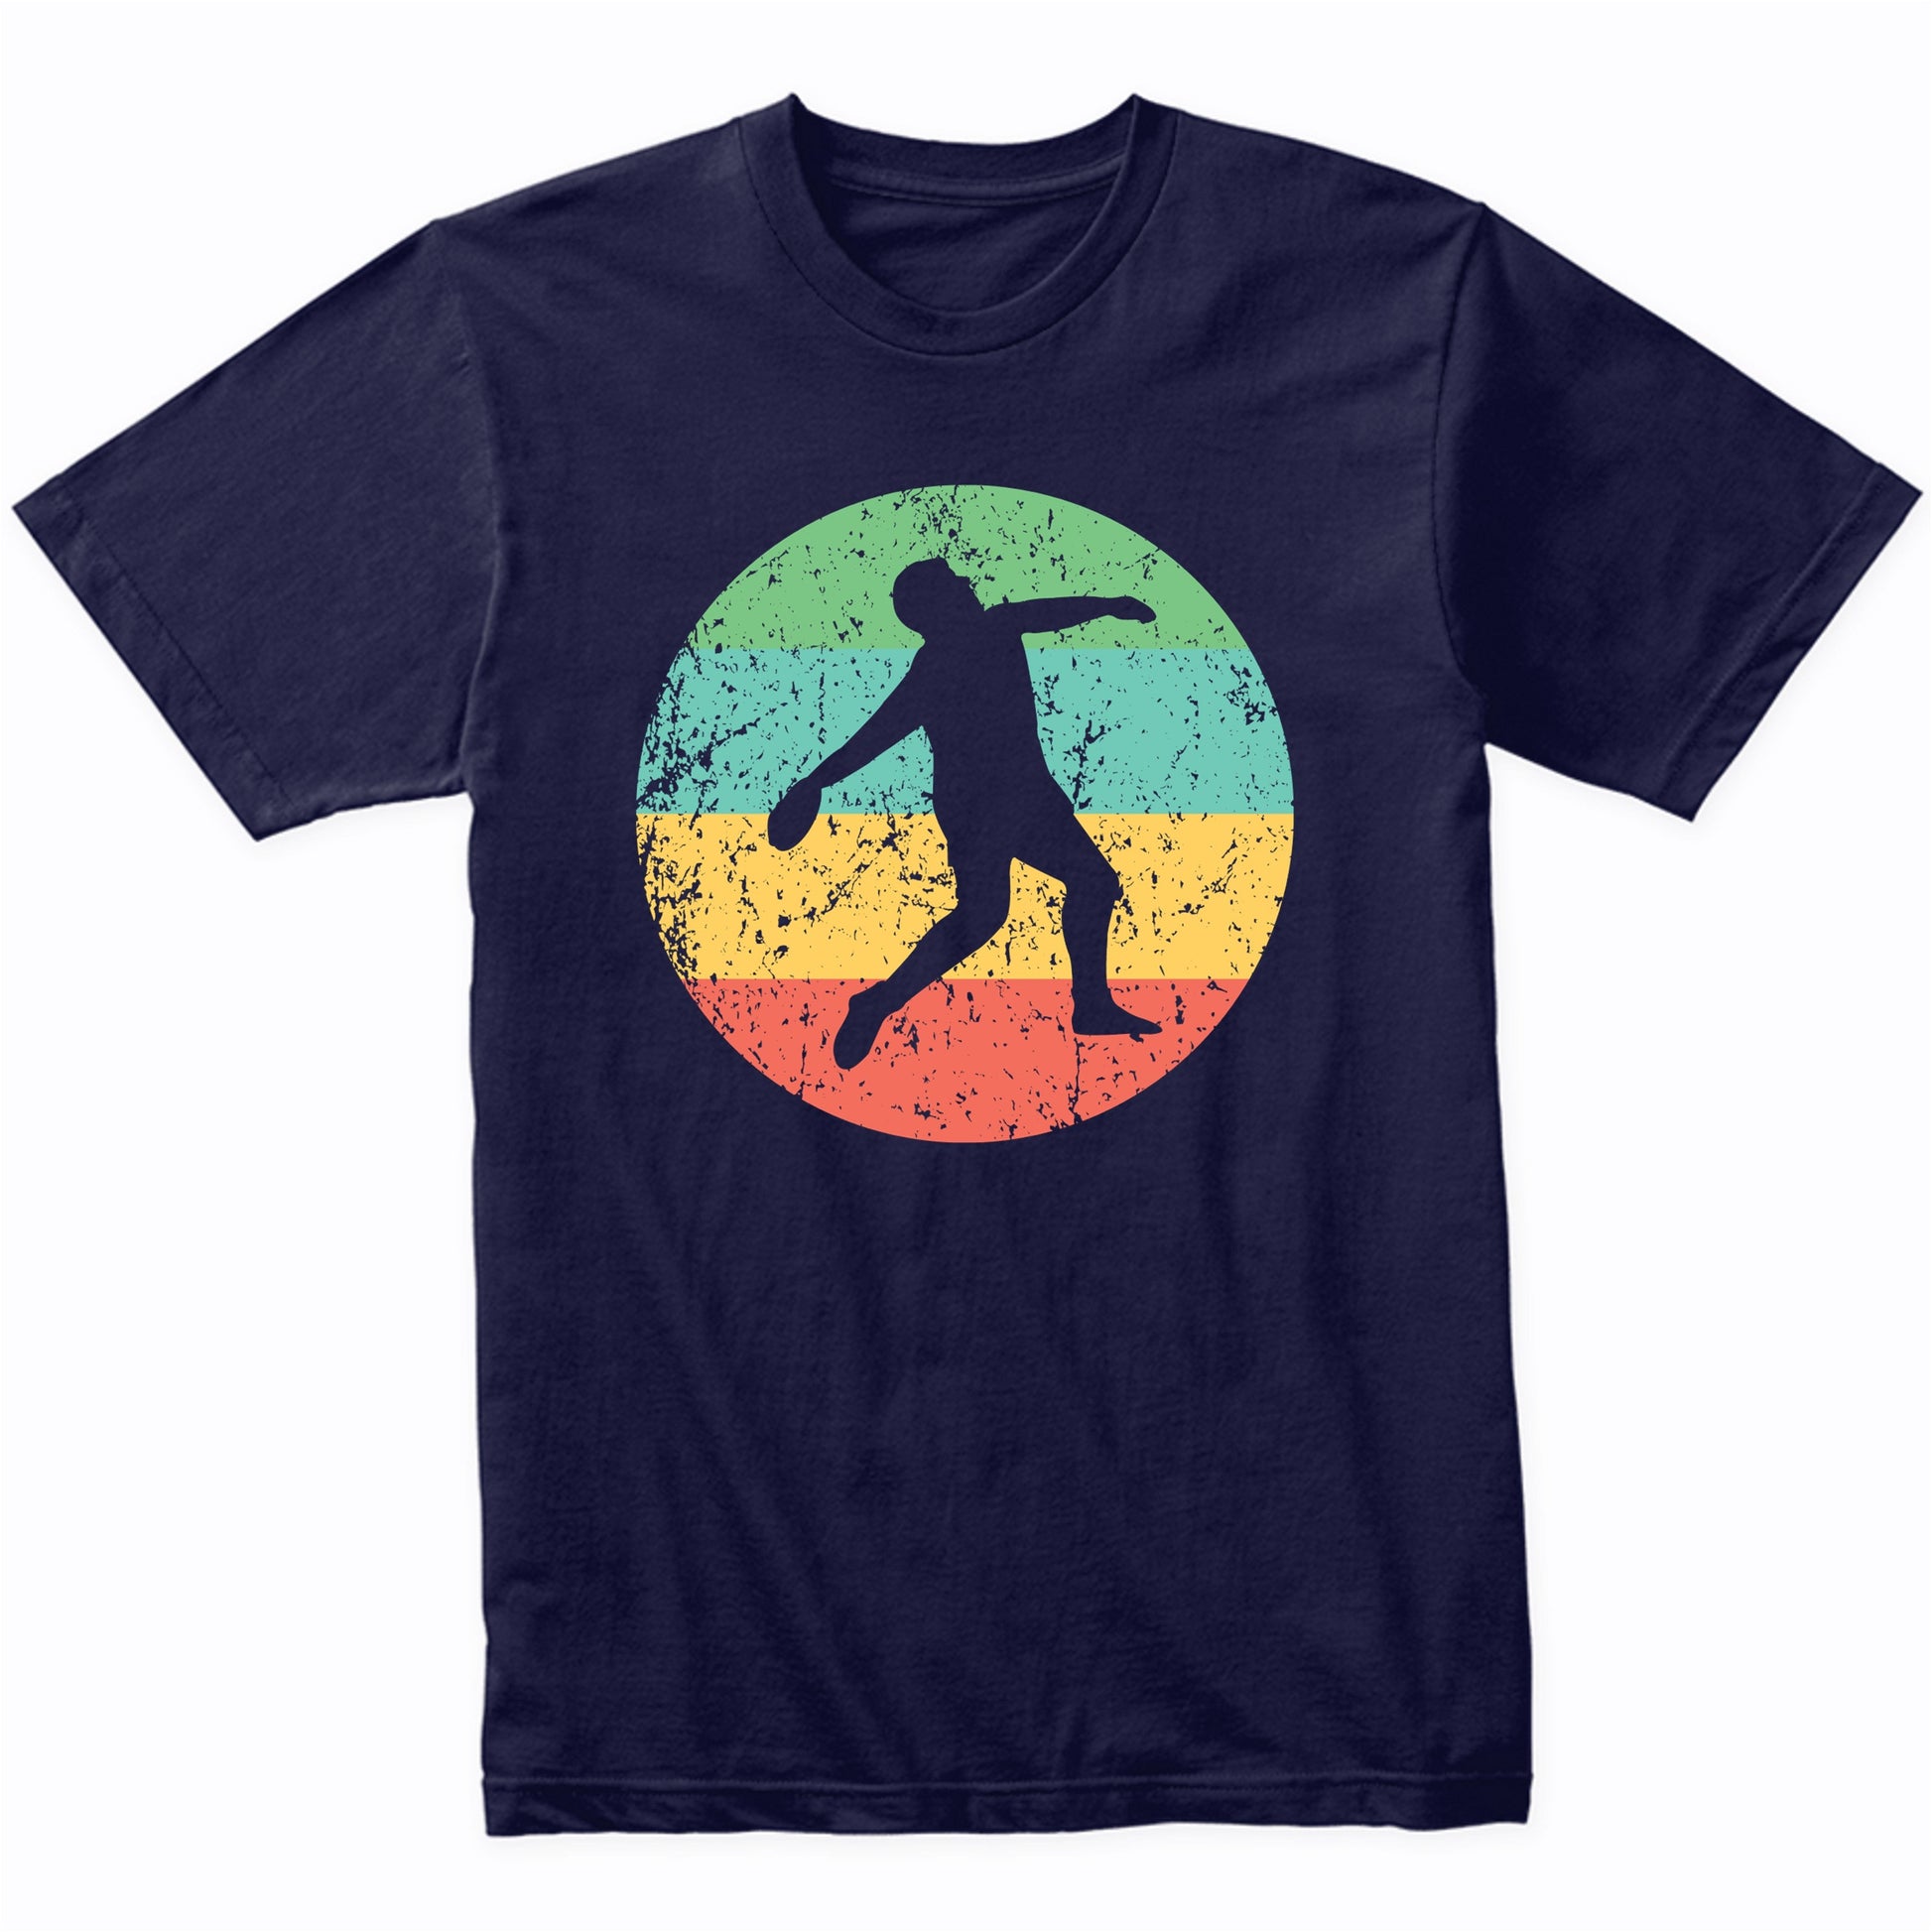 Discus Throw Shirt - Vintage Retro Track And Field T-Shirt